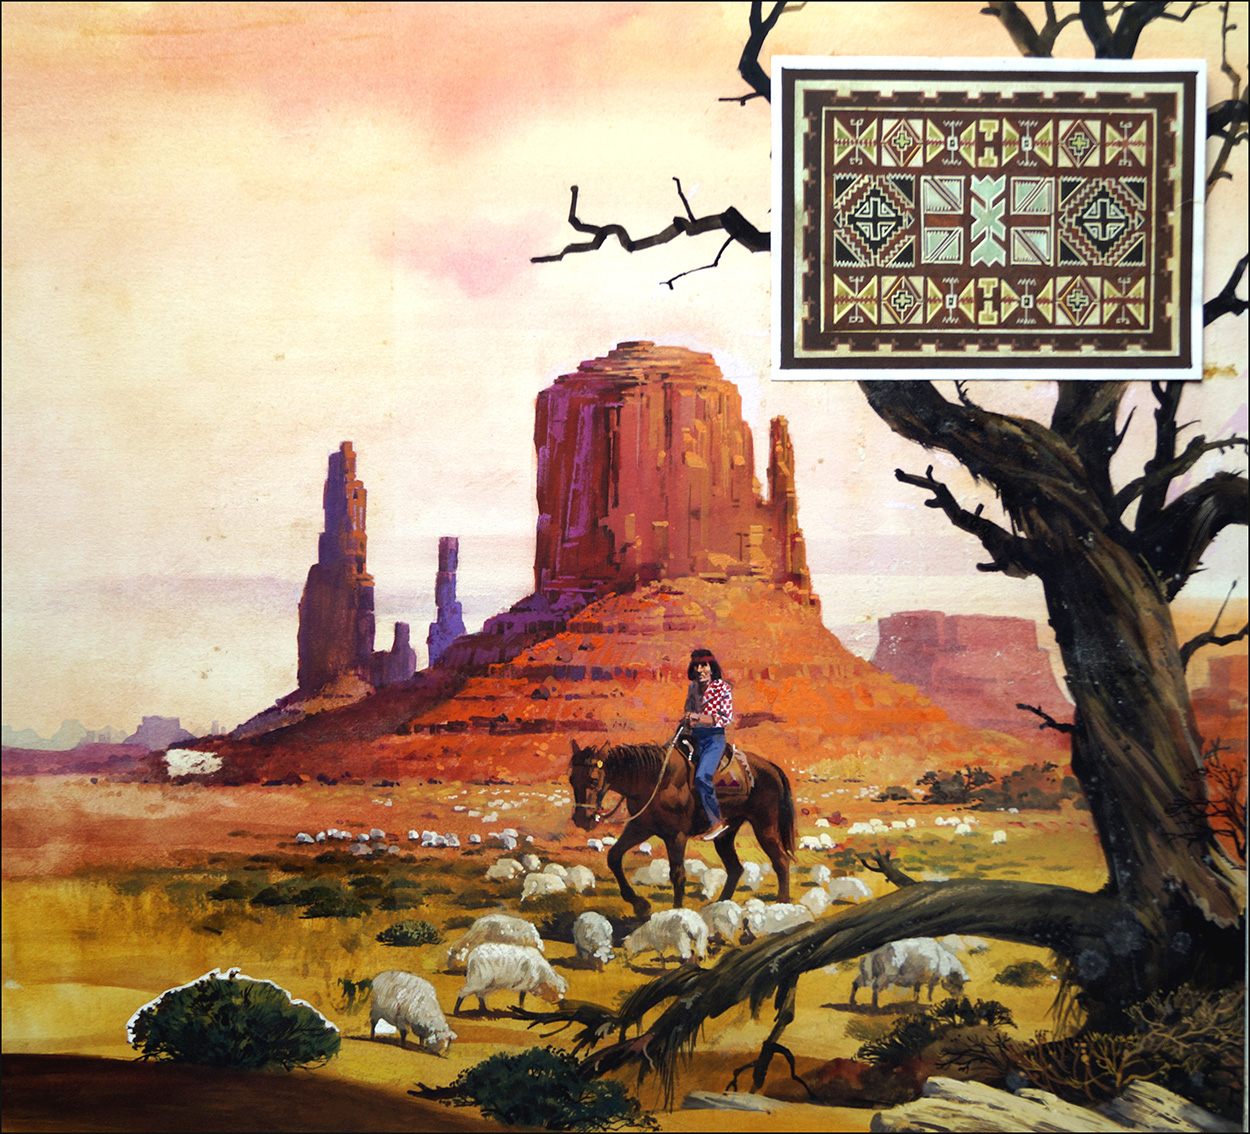 Home for the Navajo (Original) art by Andrew Howat at The Illustration Art Gallery